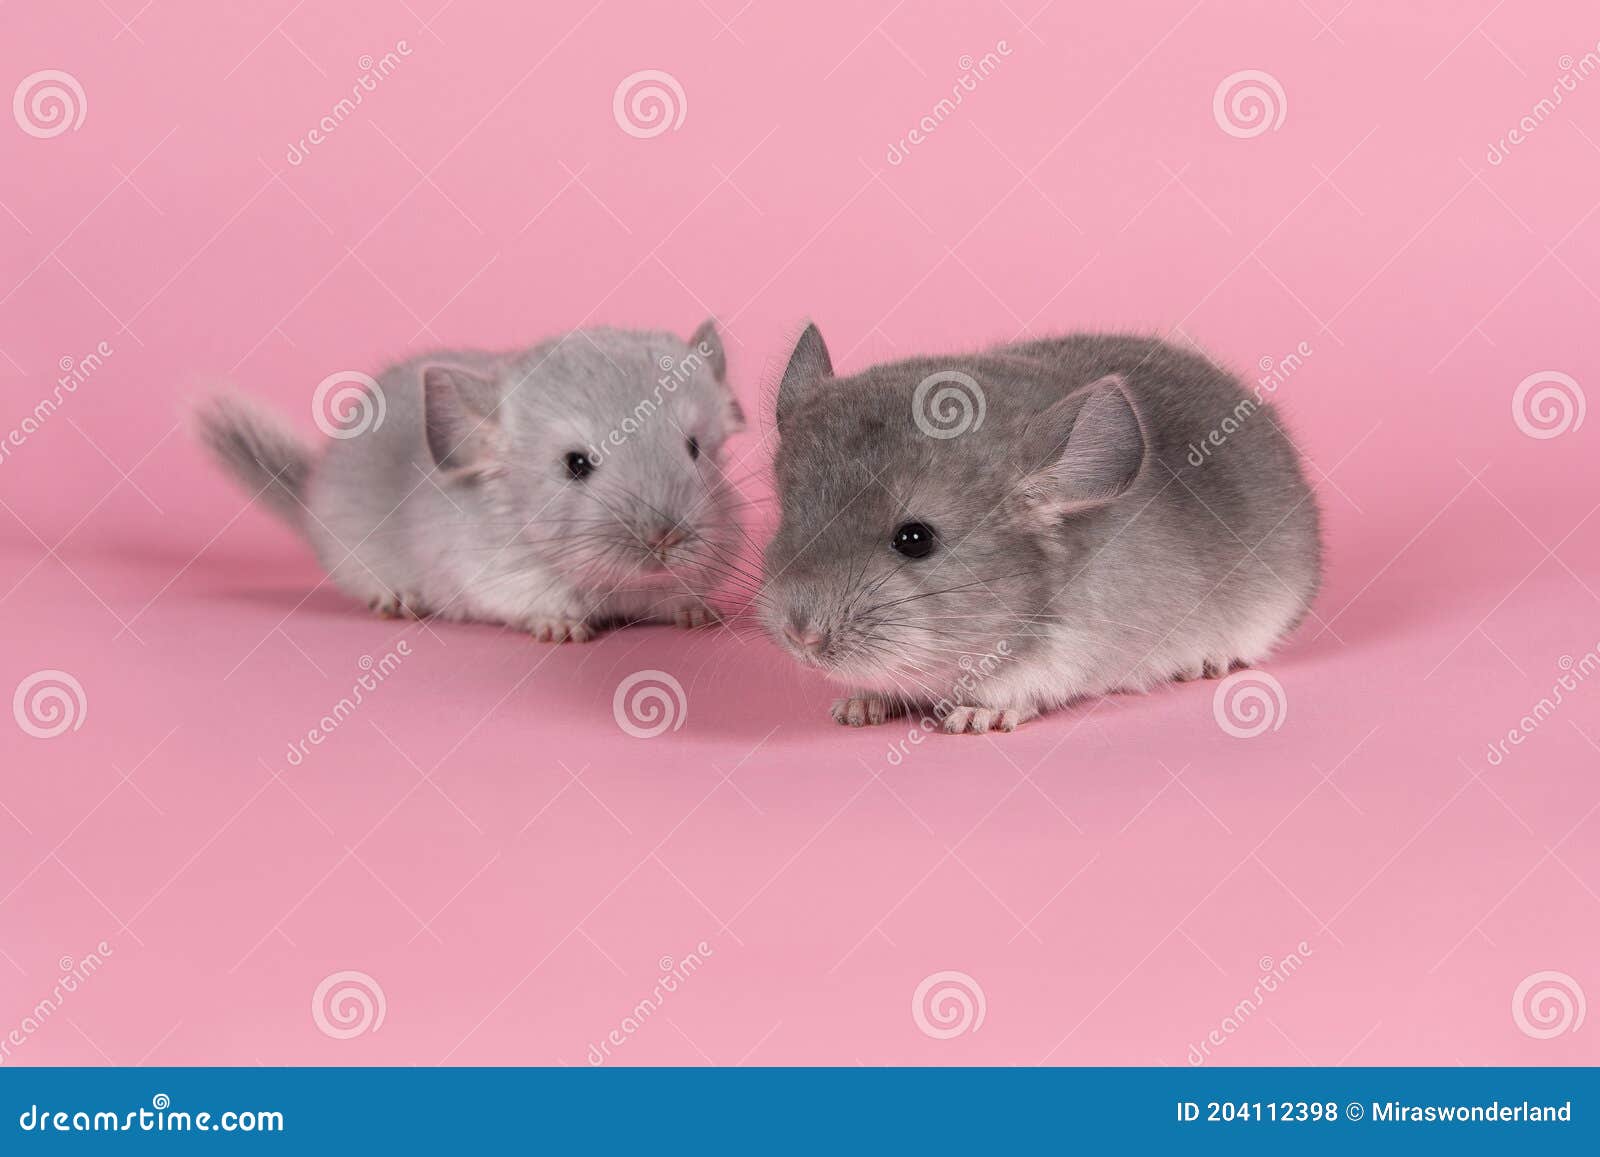 two gray  baby chinchillas seen from the side on a pink background